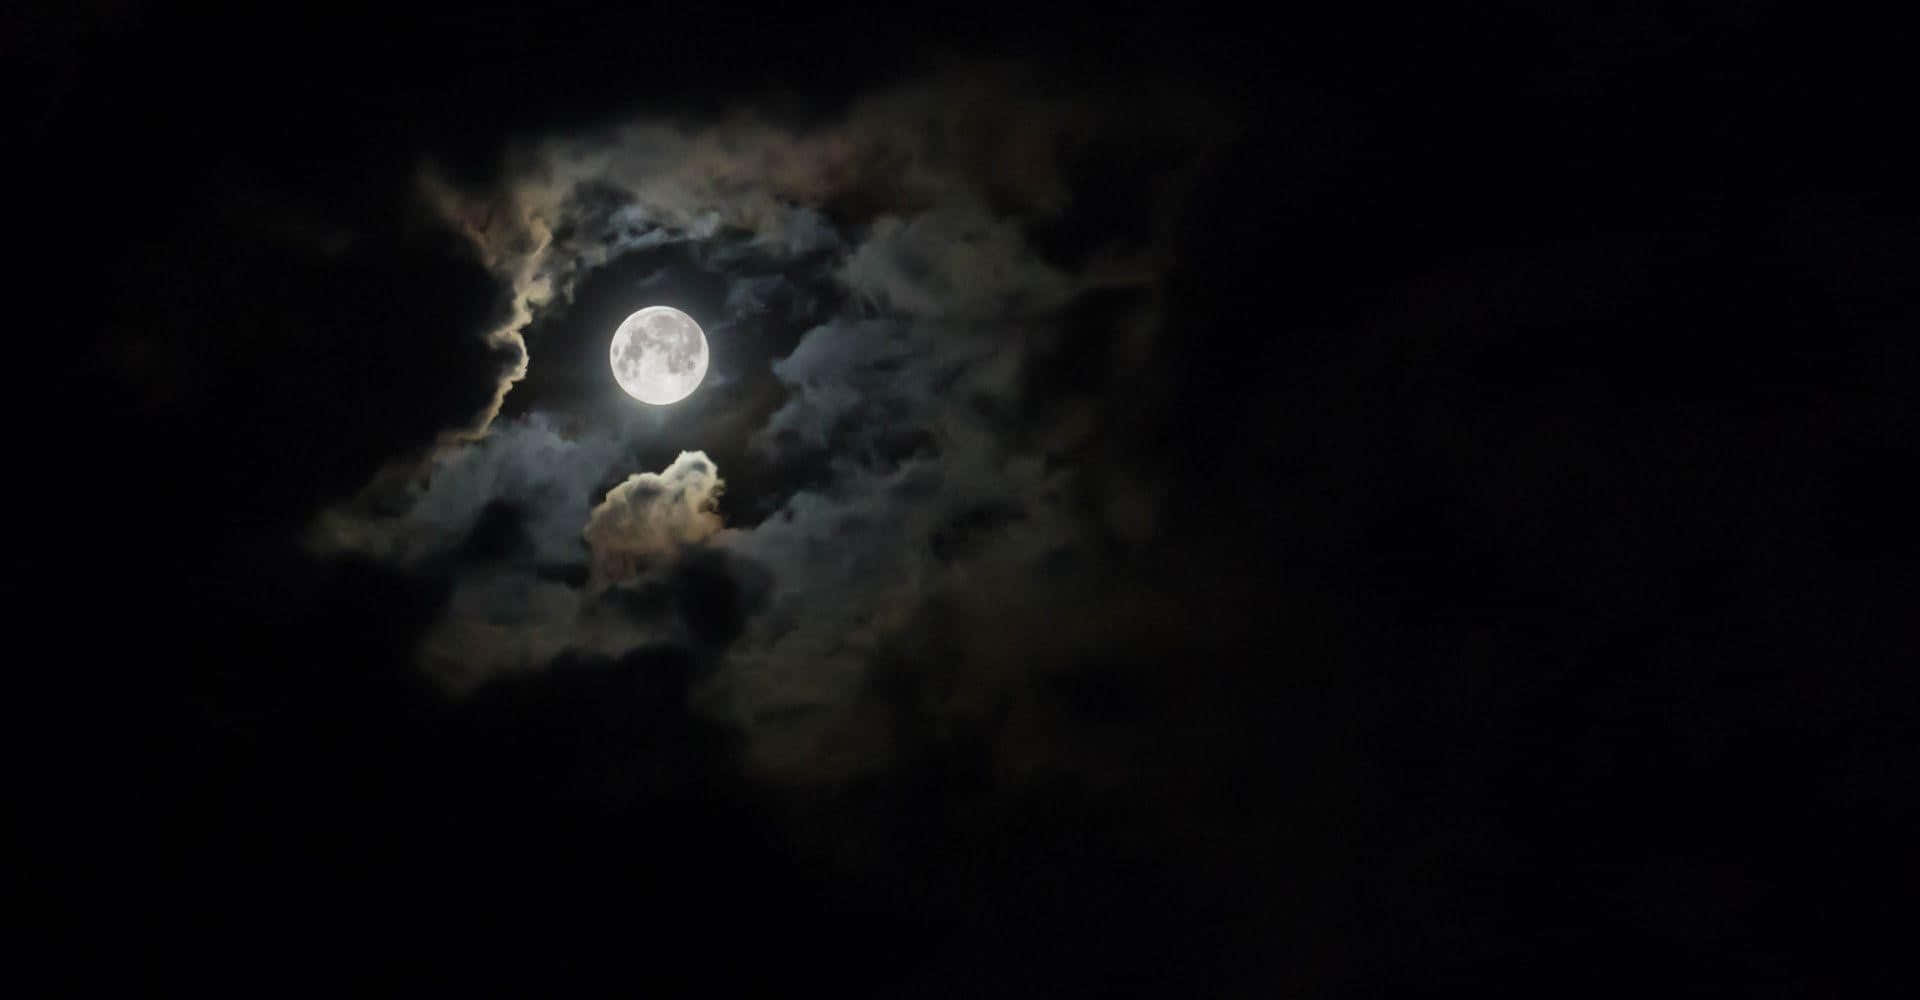 the moon is seen through the clouds